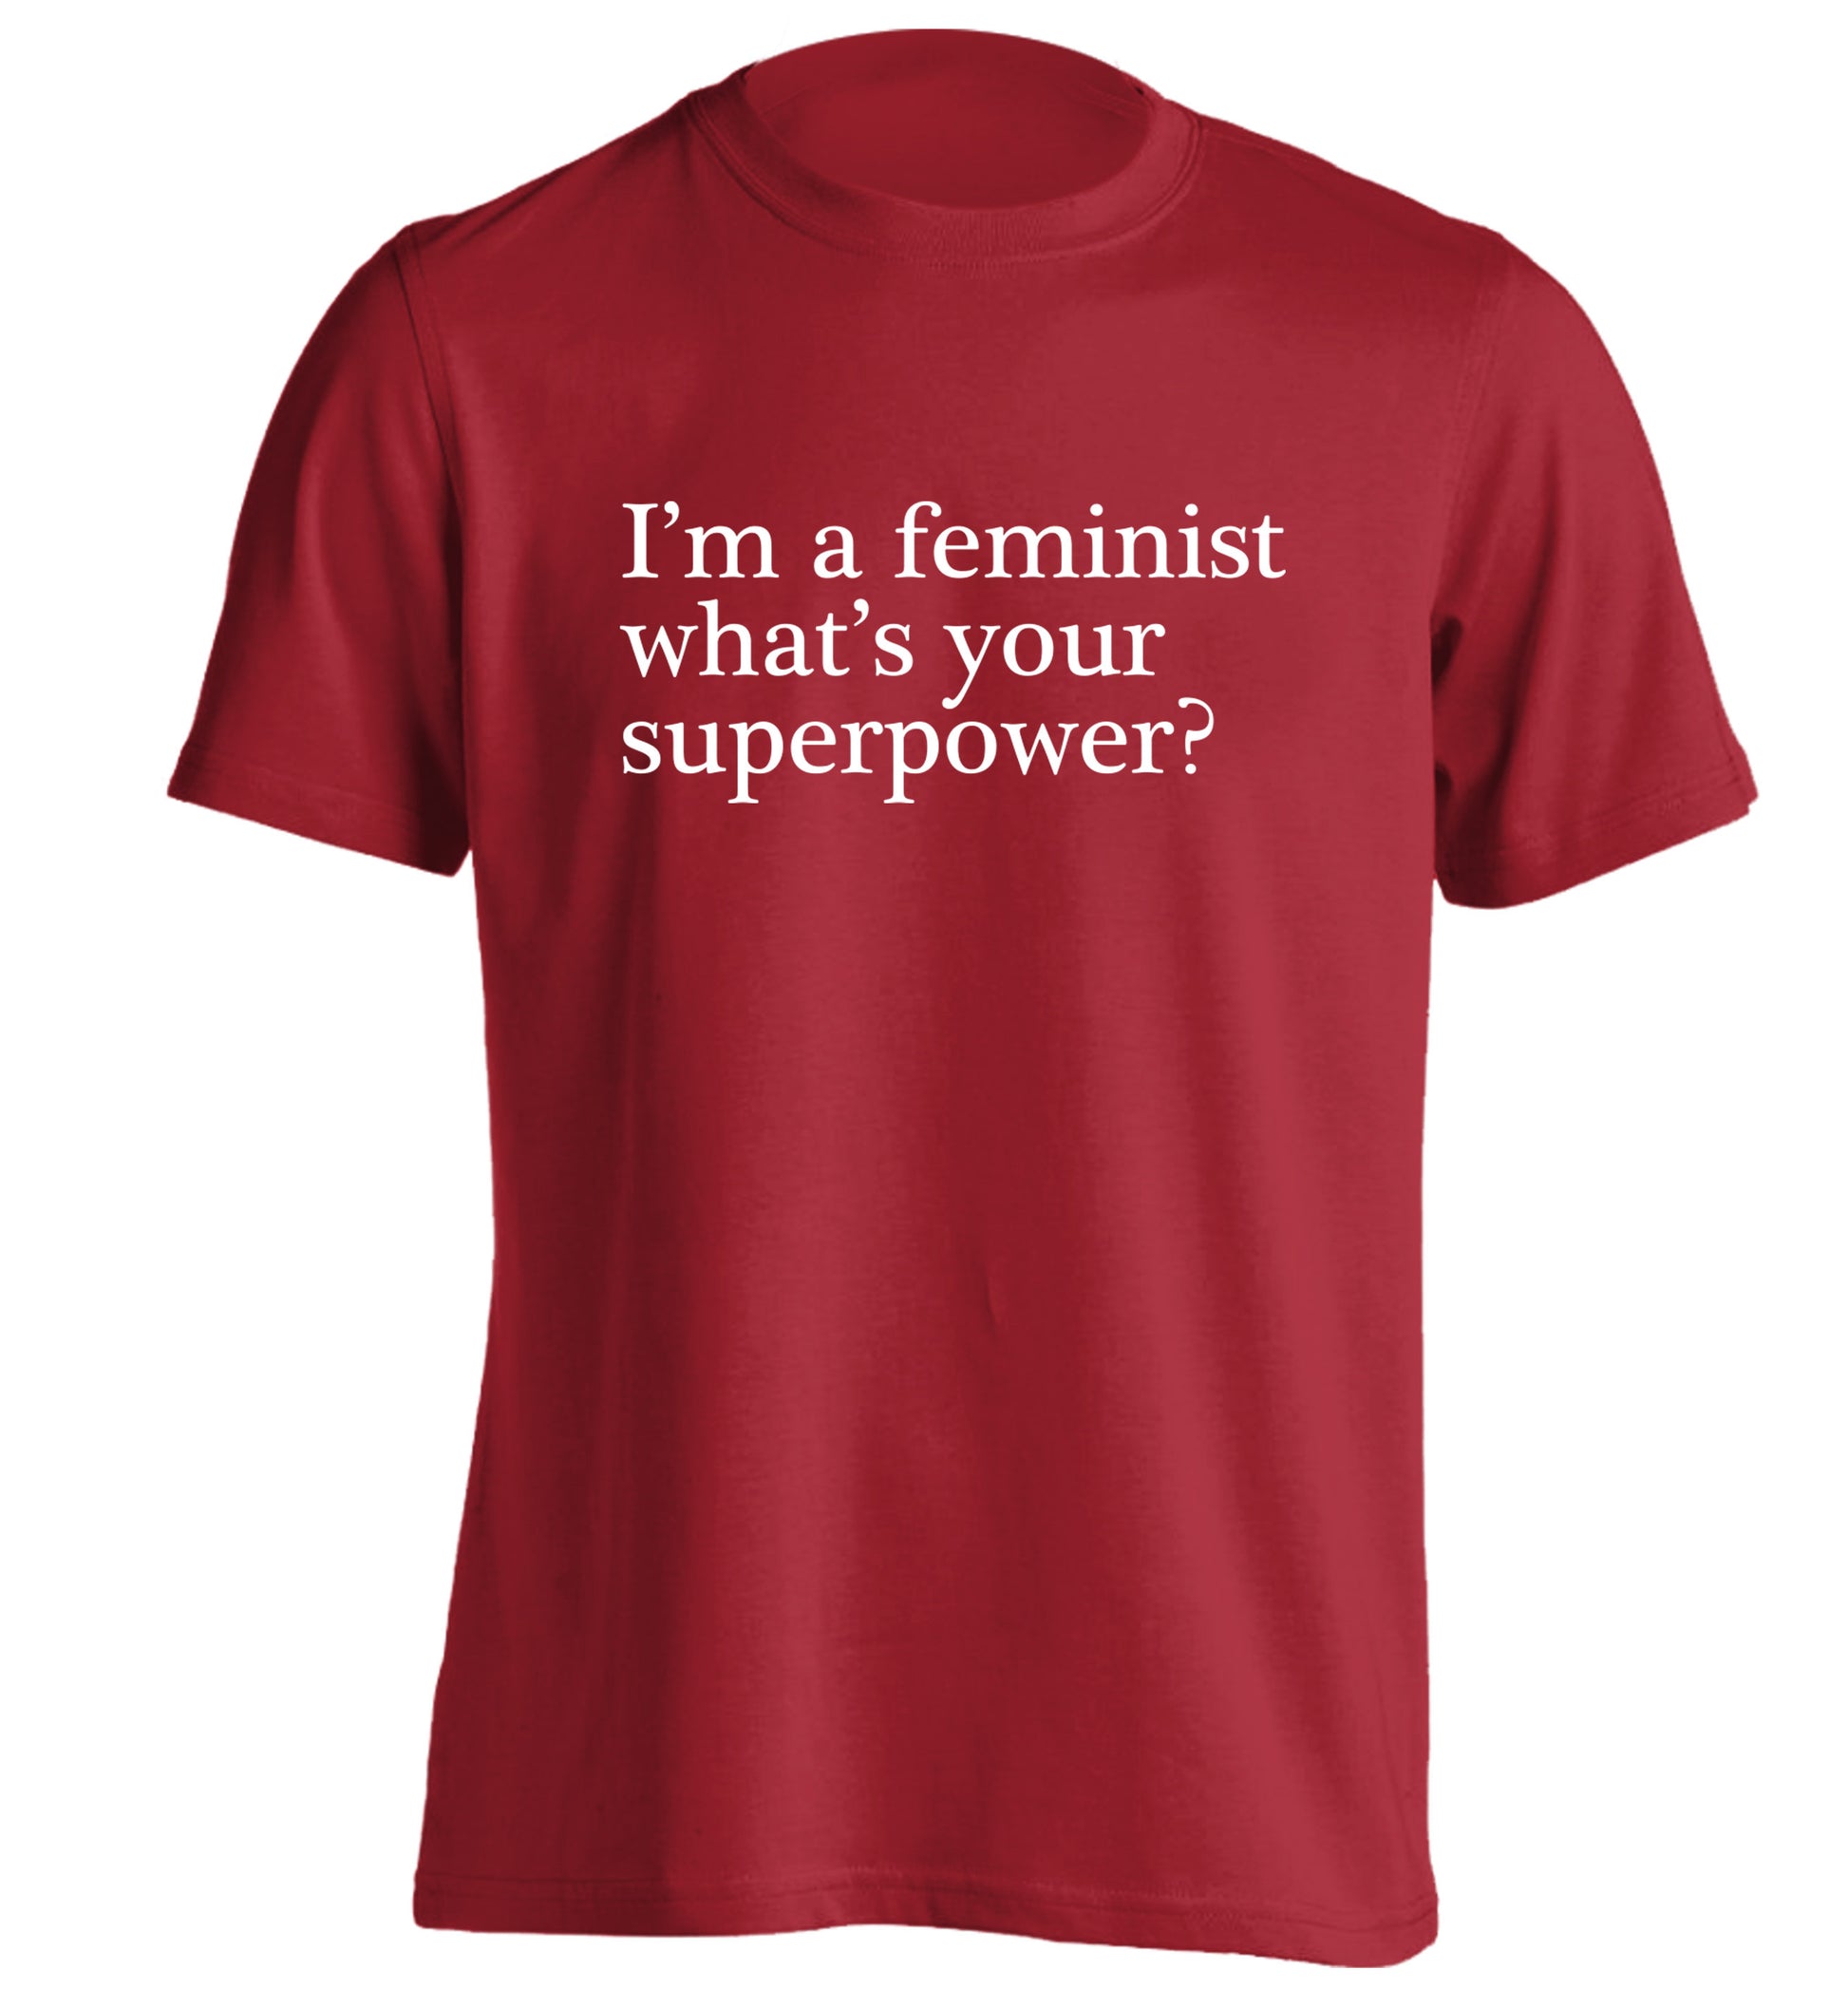 I'm a feminist what's your superpower? adults unisex red Tshirt 2XL